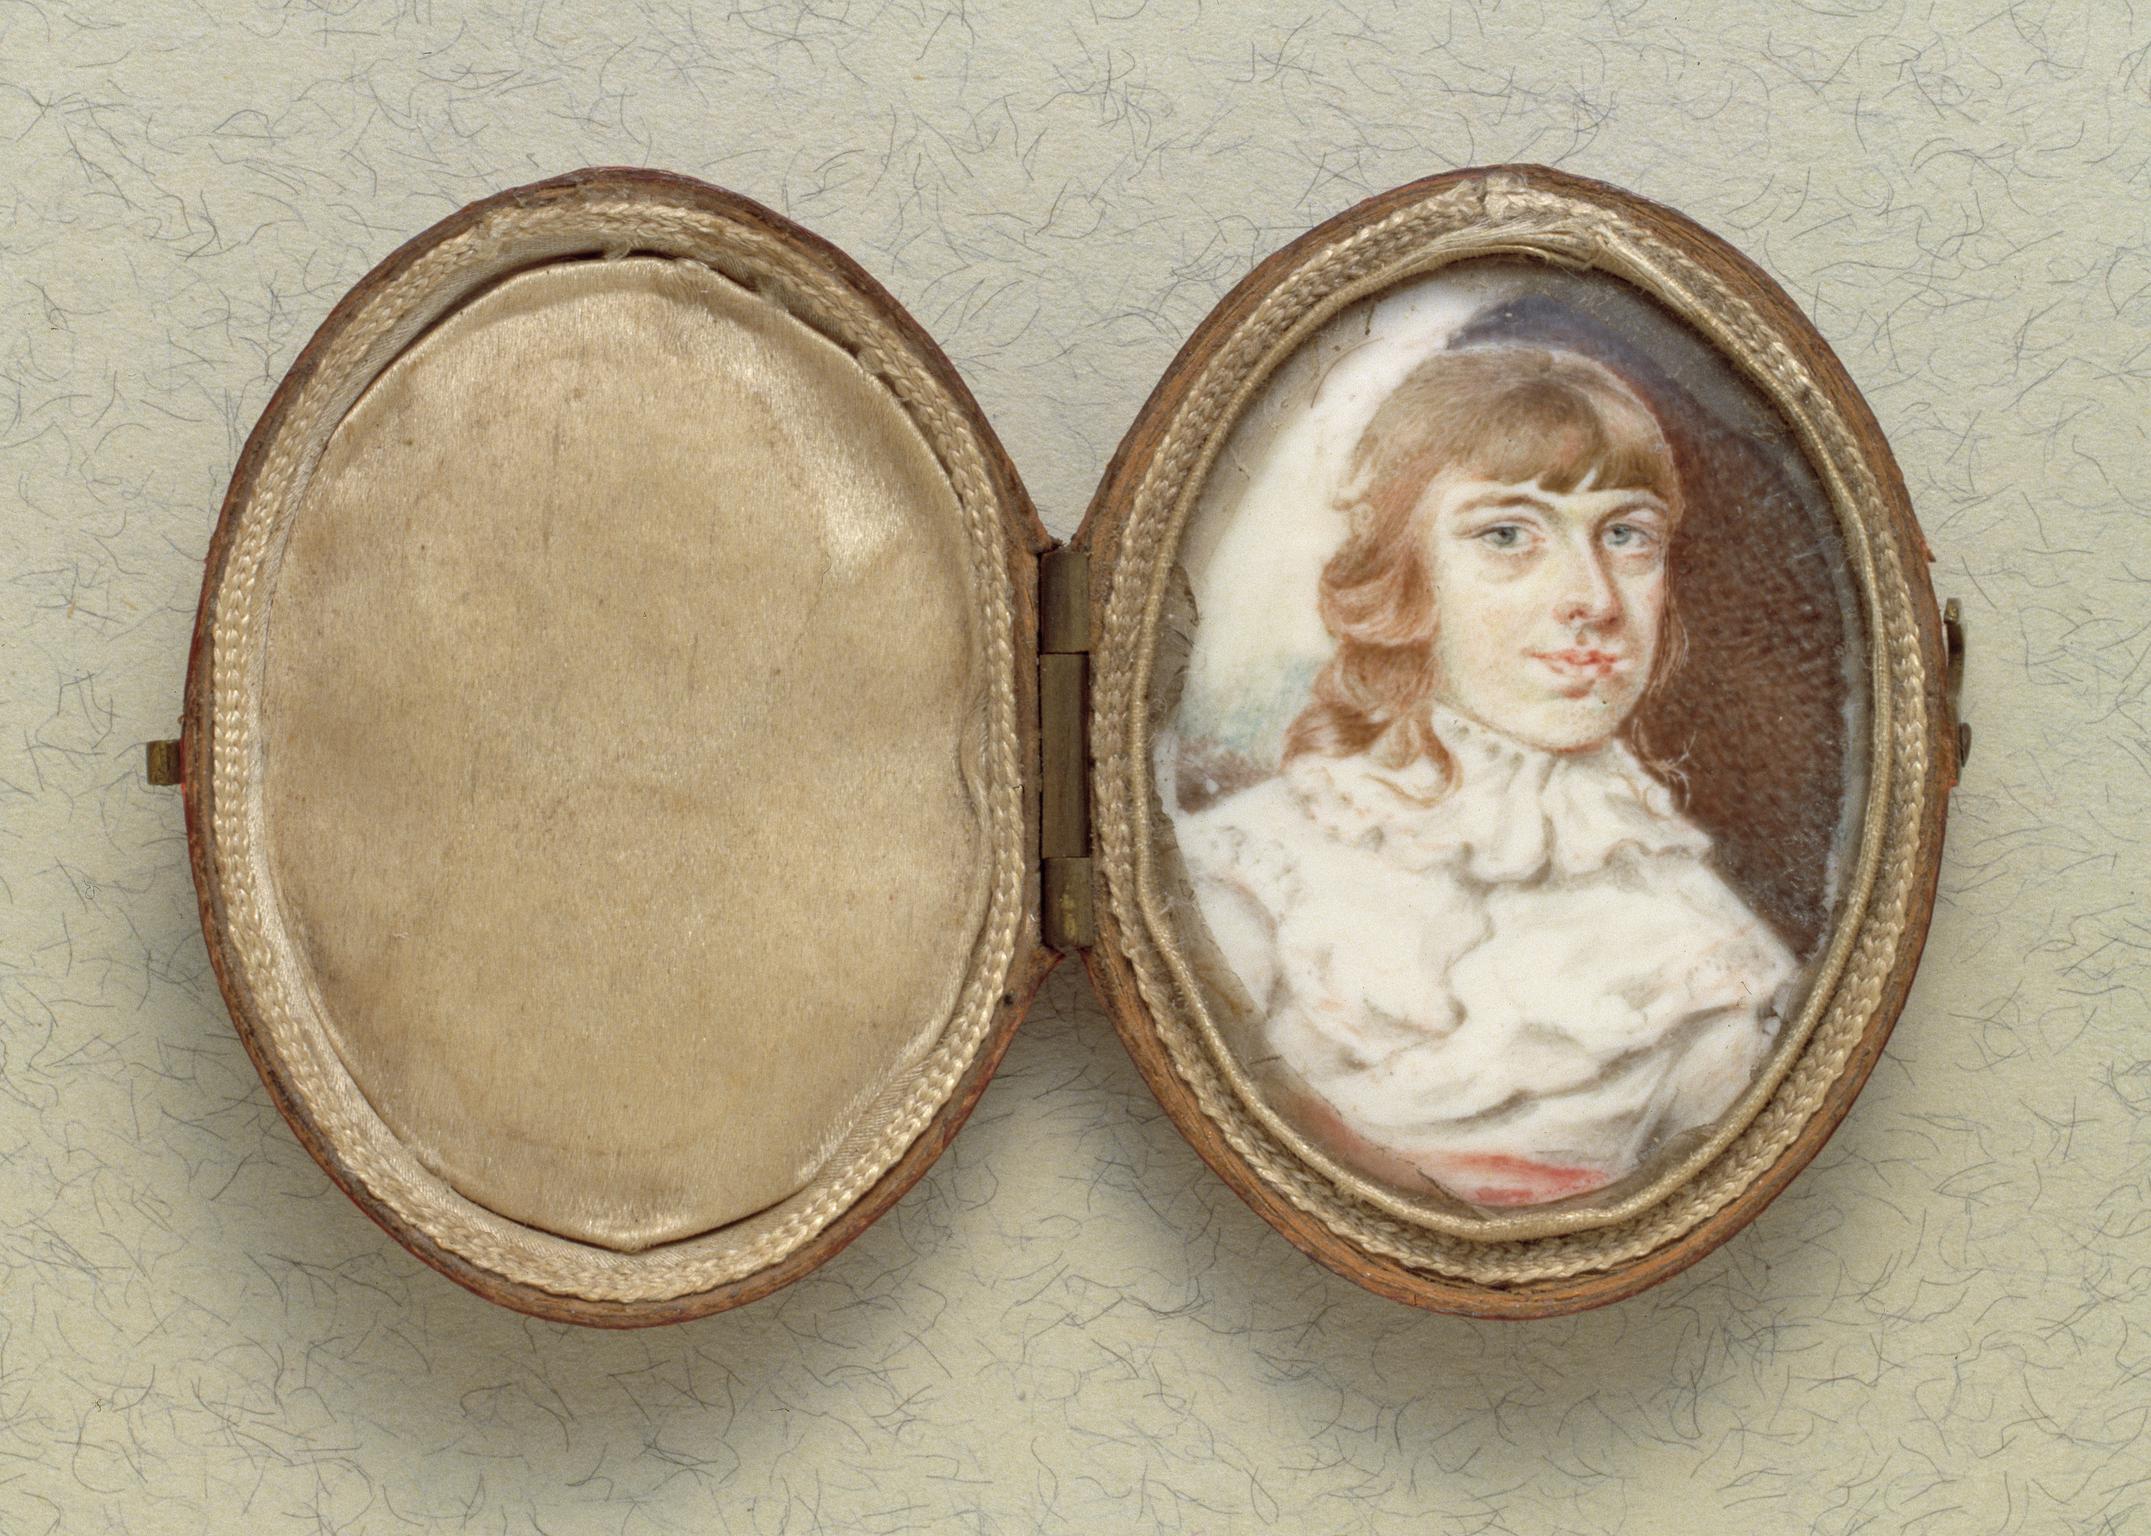 Unidentified Young Man in Seventeenth-Century Dress